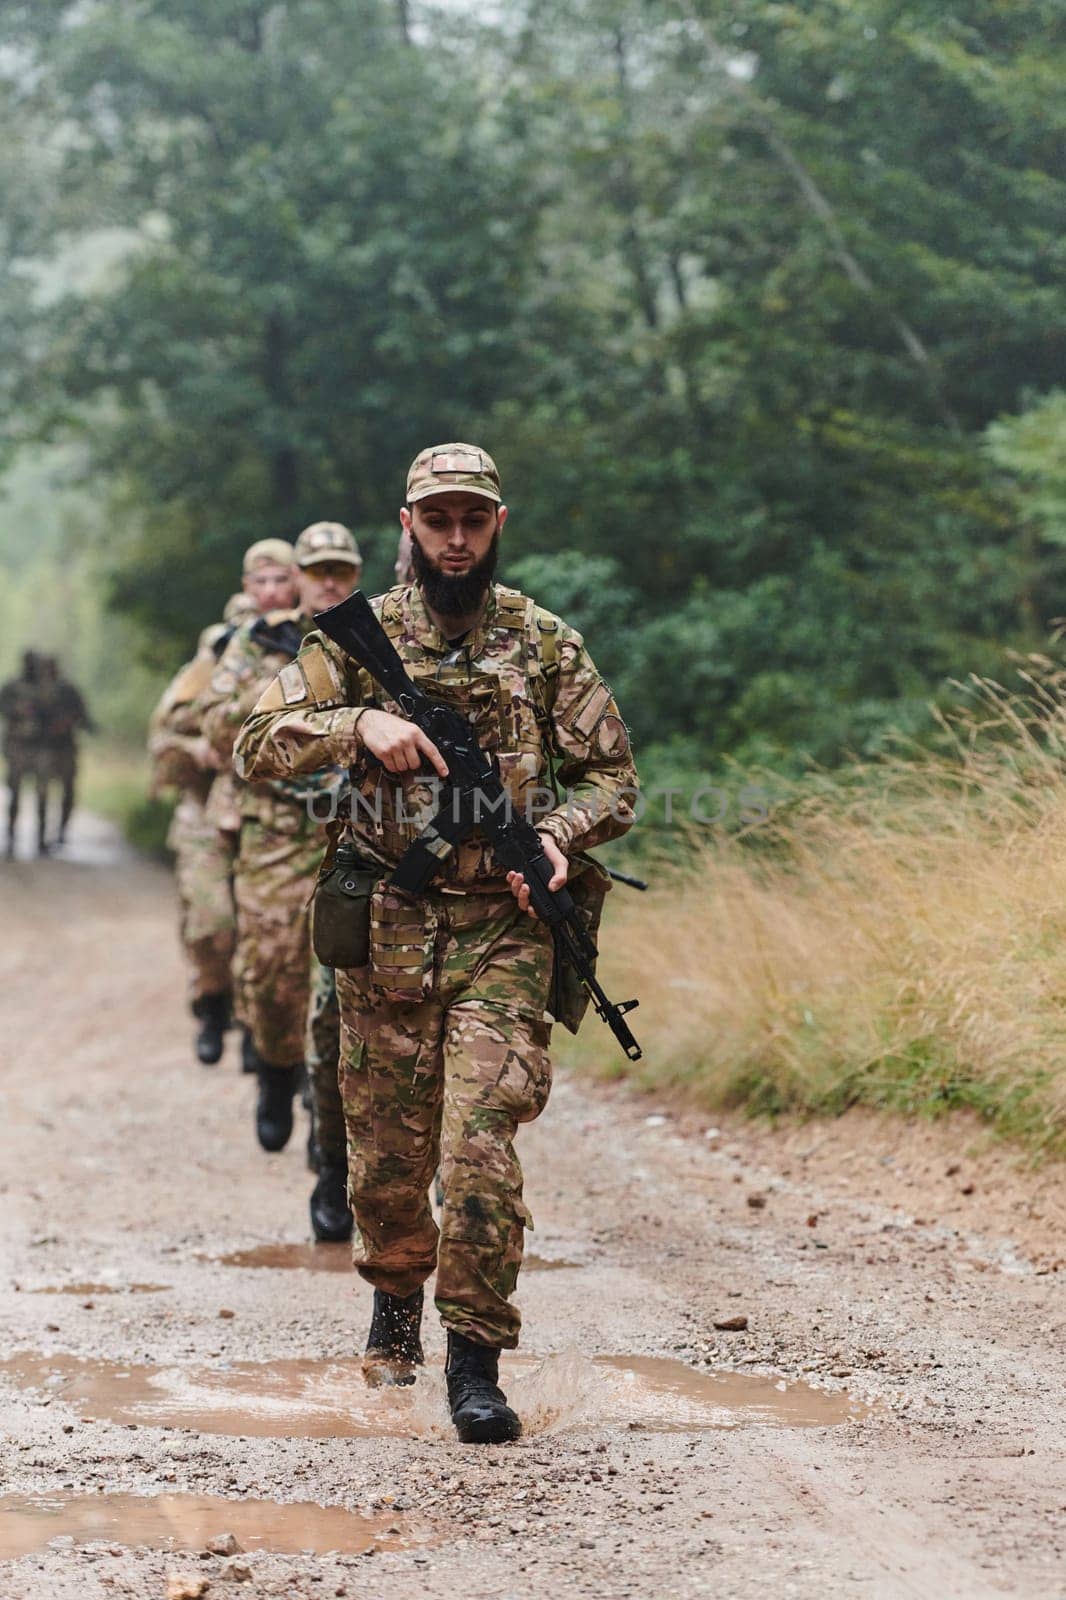 A disciplined and specialized military unit, donned in camouflage, strategically patrolling and maintaining control in a high-stakes environment, showcasing their precision, unity, and readiness for special operations.